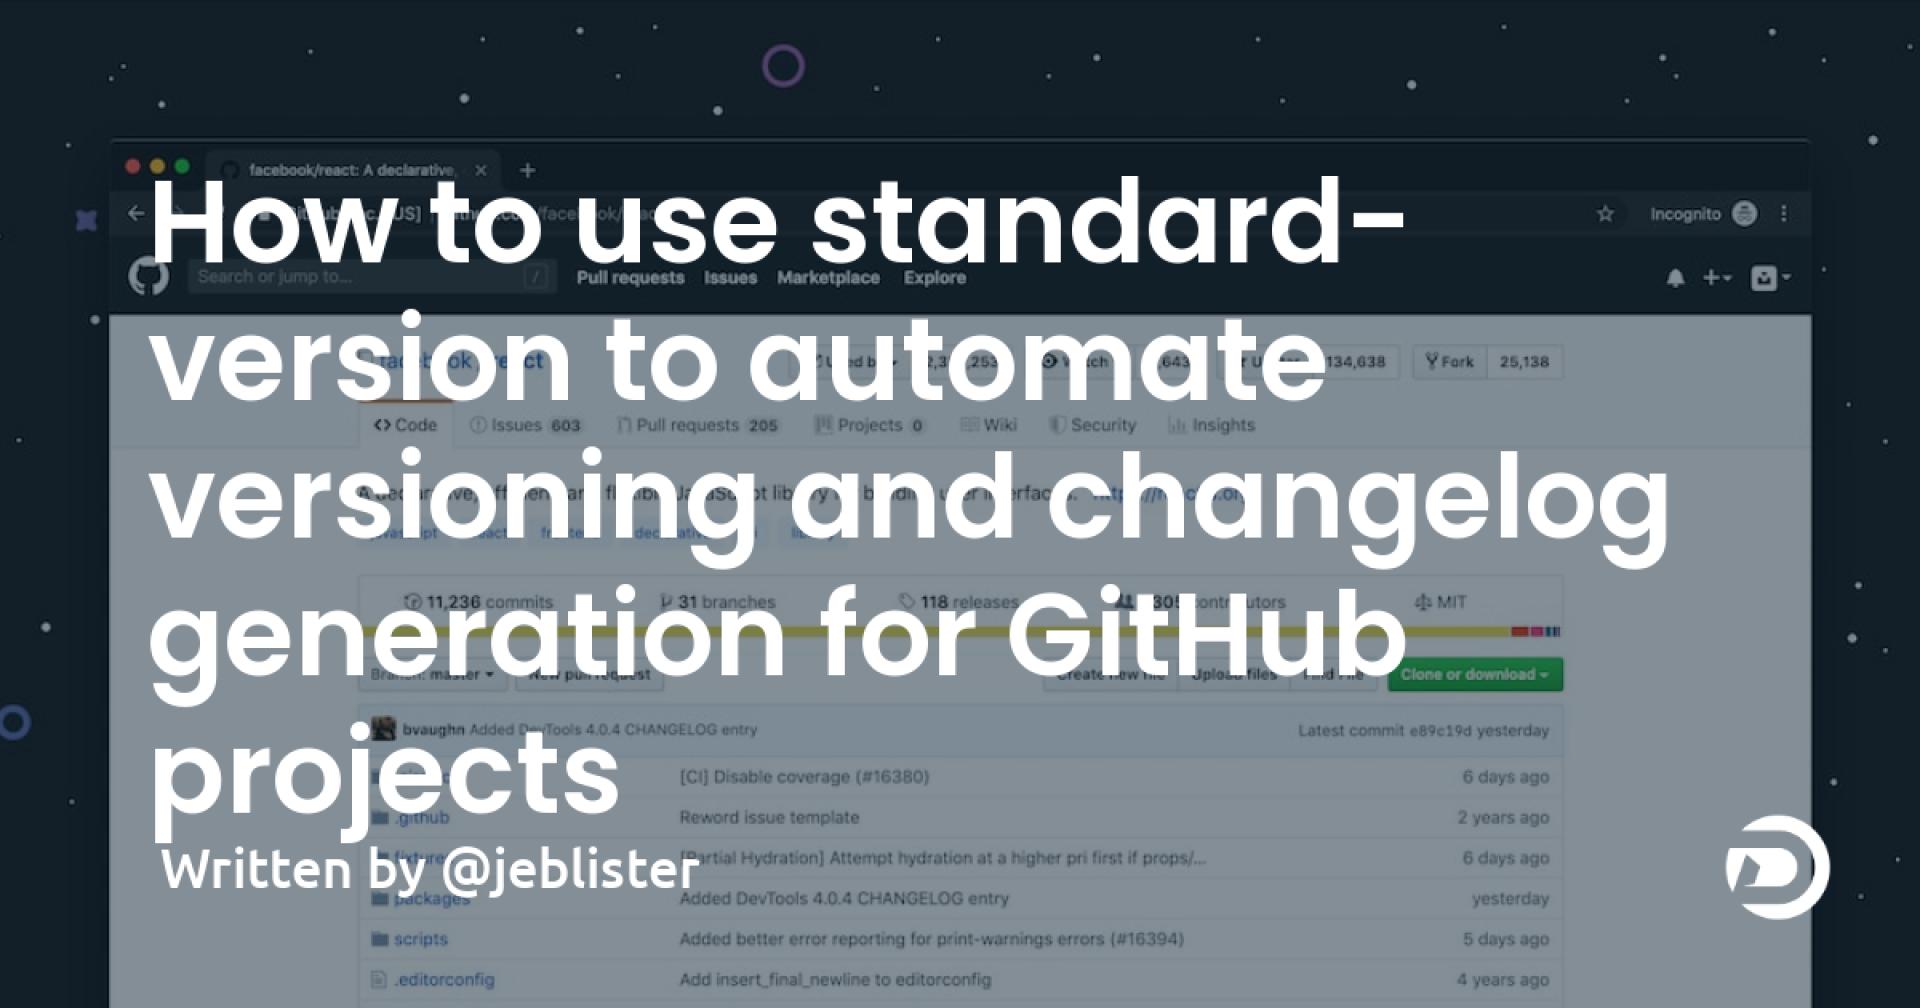 How to use standard-version to automate versioning and changelog generation for GitHub projects